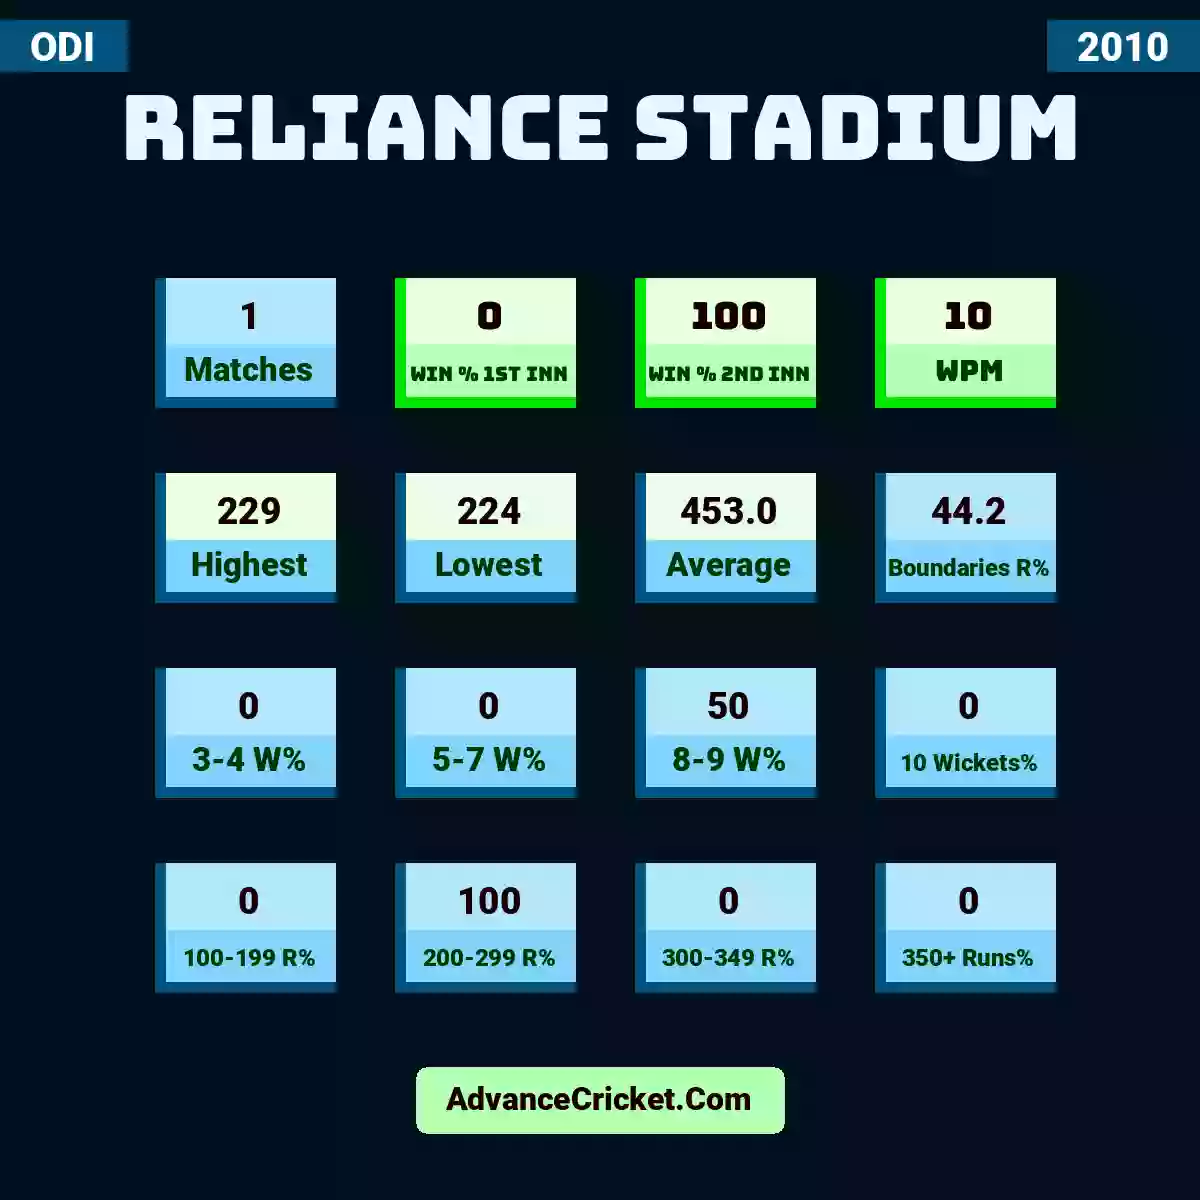 Image showing Reliance Stadium with Matches: 1, Win % 1st Inn: 0, Win % 2nd Inn: 100, WPM: 10, Highest: 229, Lowest: 224, Average: 453.0, Boundaries R%: 44.2, 3-4 W%: 0, 5-7 W%: 0, 8-9 W%: 50, 10 Wickets%: 0, 100-199 R%: 0, 200-299 R%: 100, 300-349 R%: 0, 350+ Runs%: 0.